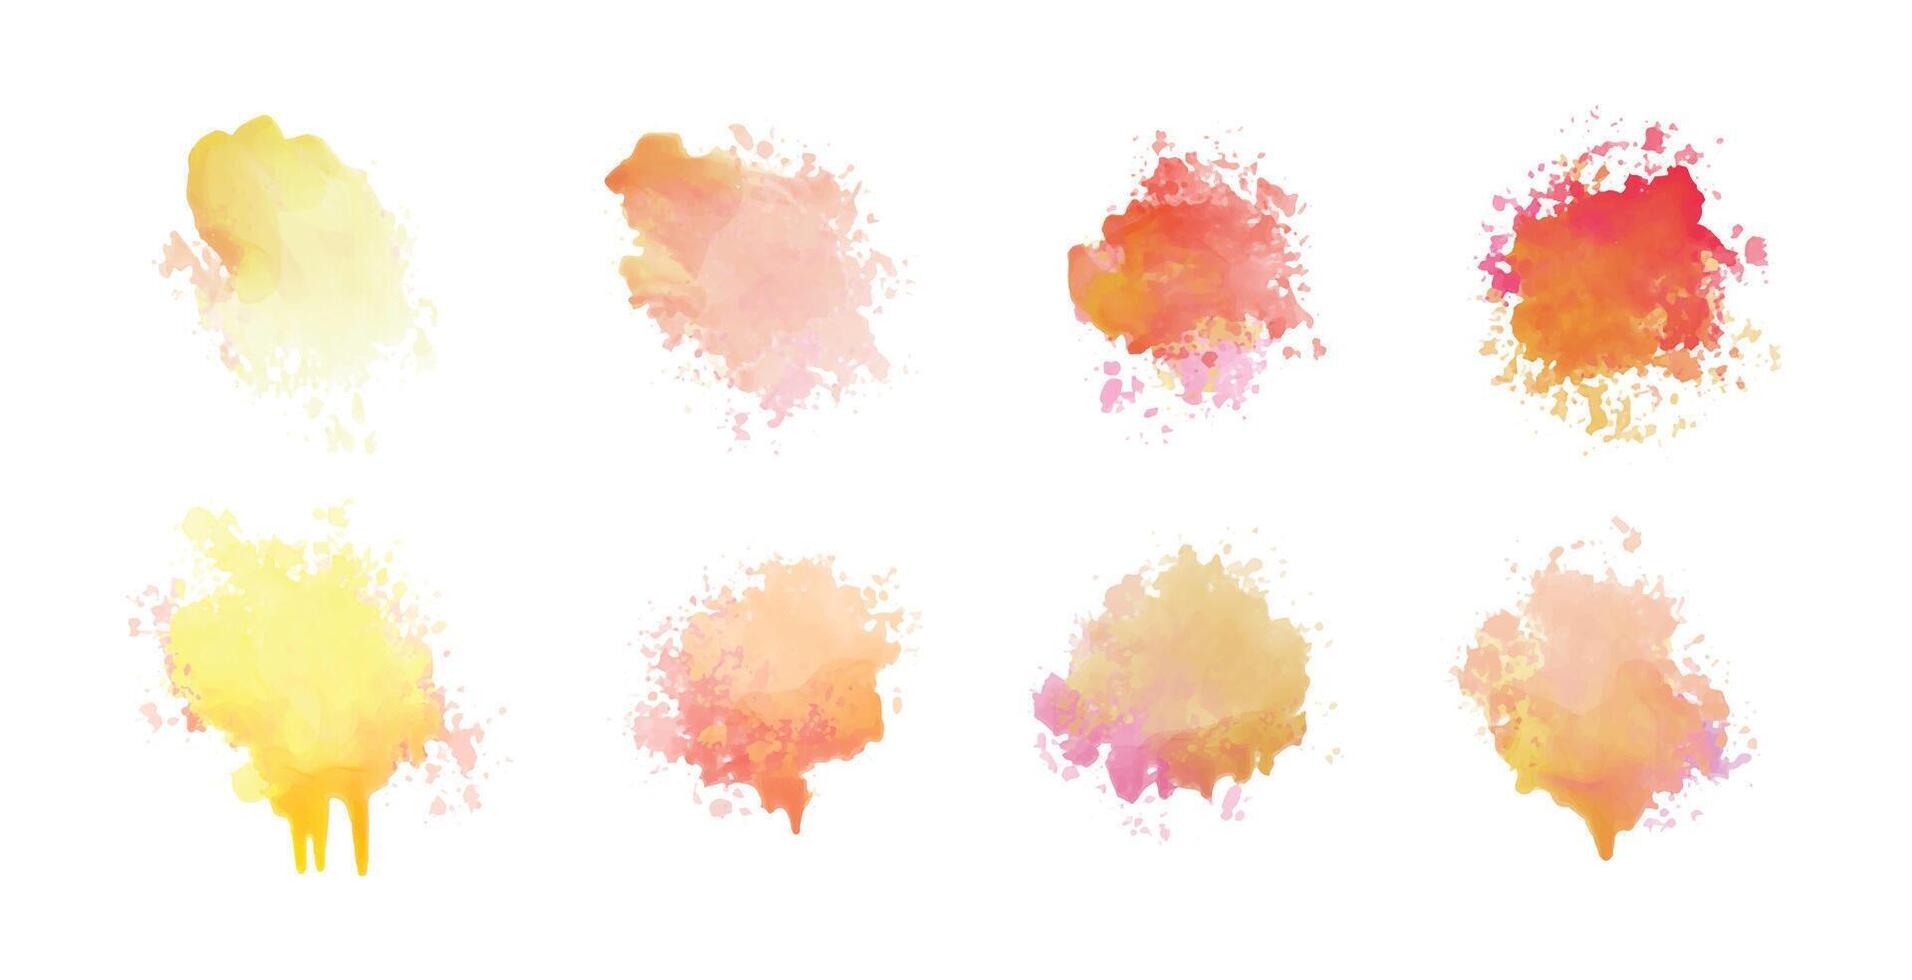 set of eight watercolor stain set design vector